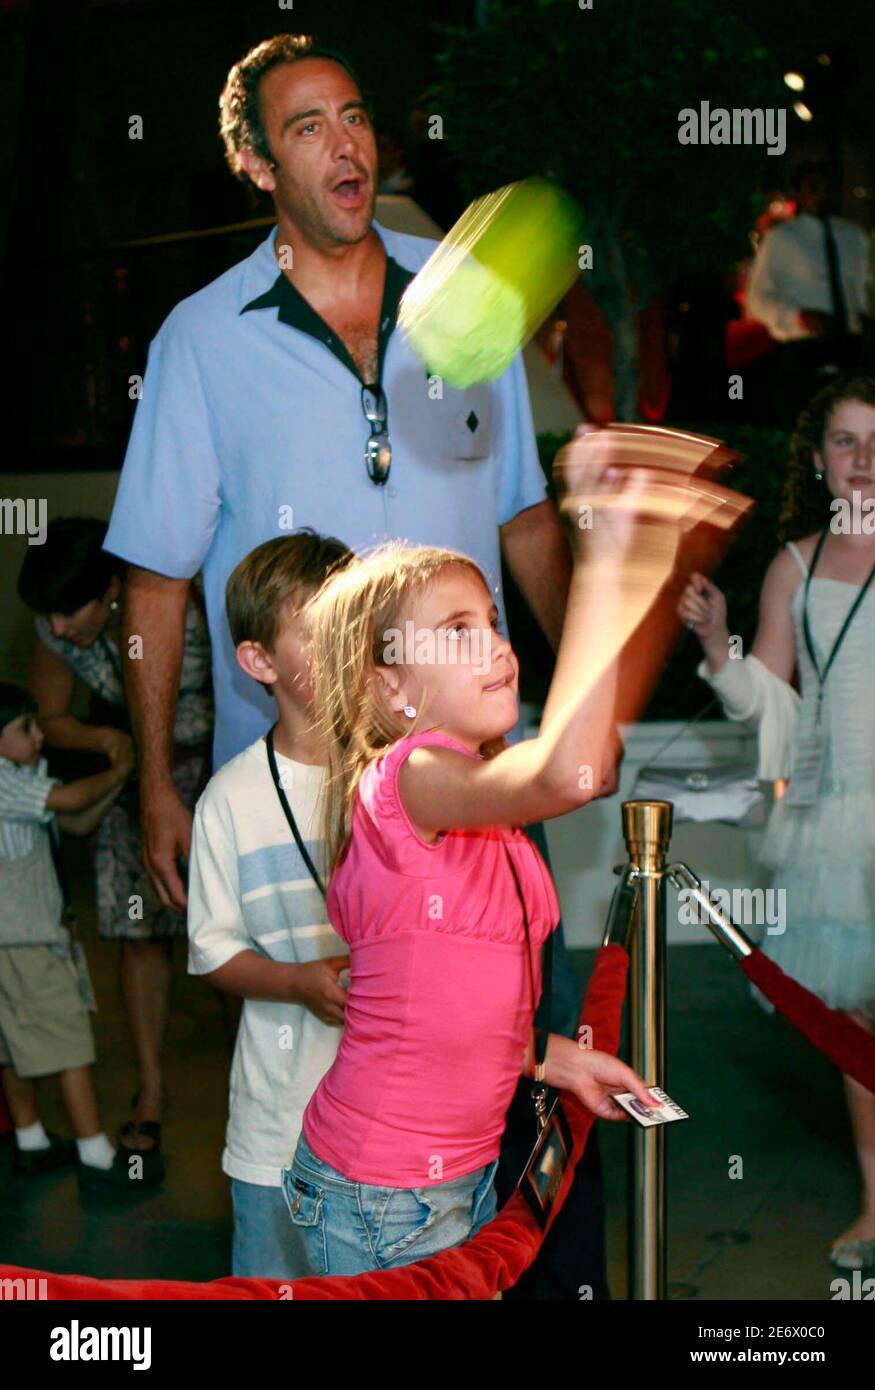 Actor Brad Garrett (top) watches his daughter Hope play games at the after  party for the premiere of the Pixar animated film 